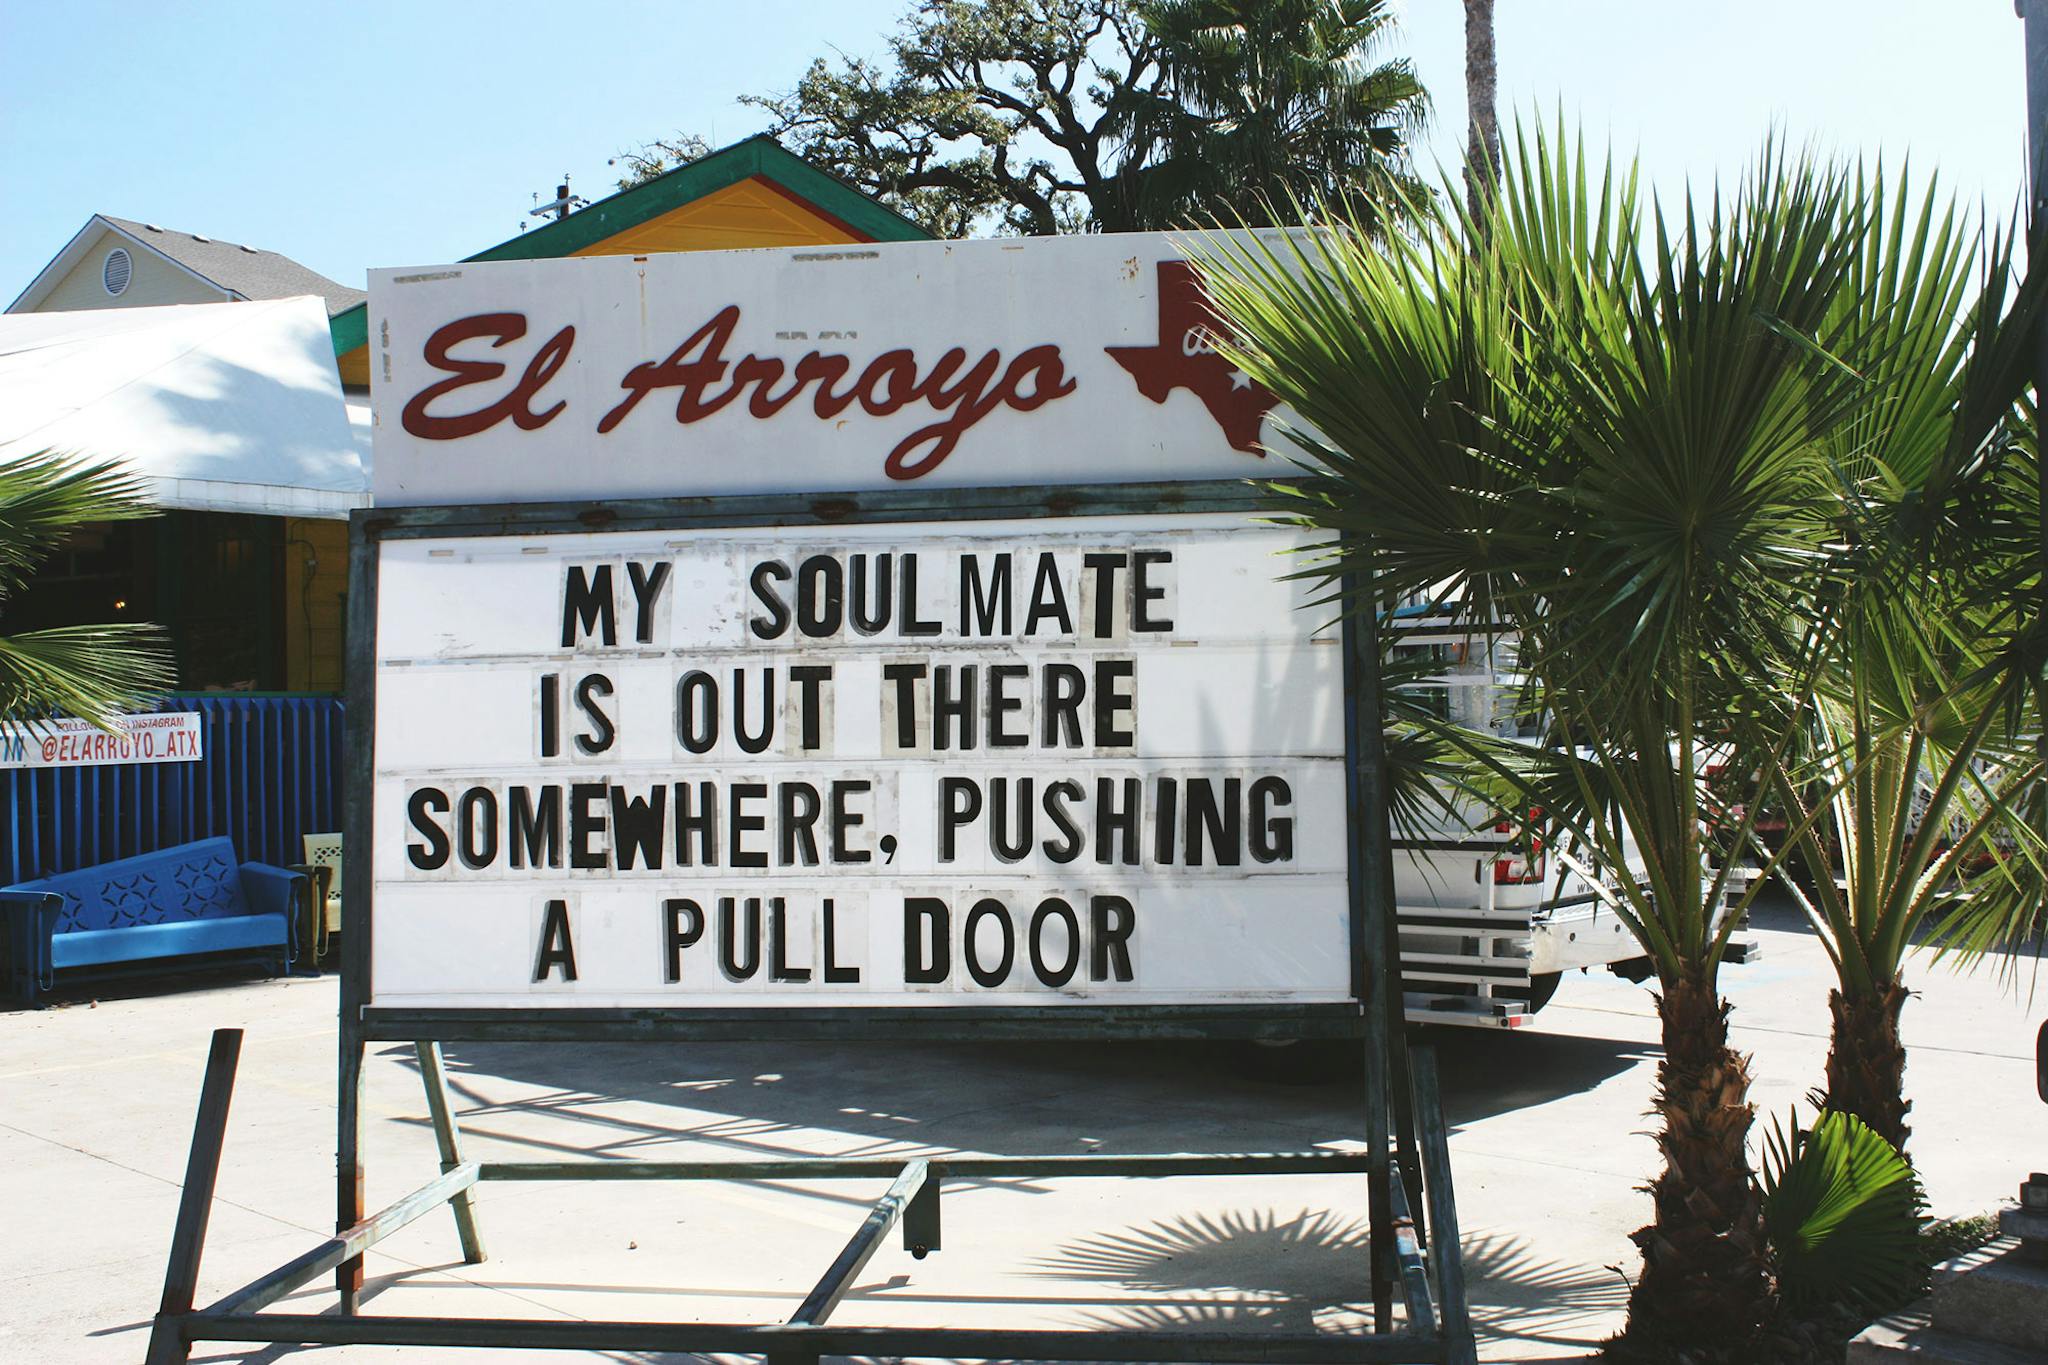 El Arroyo sign says my soulmate is out there somewhere. Pushing a pull door.